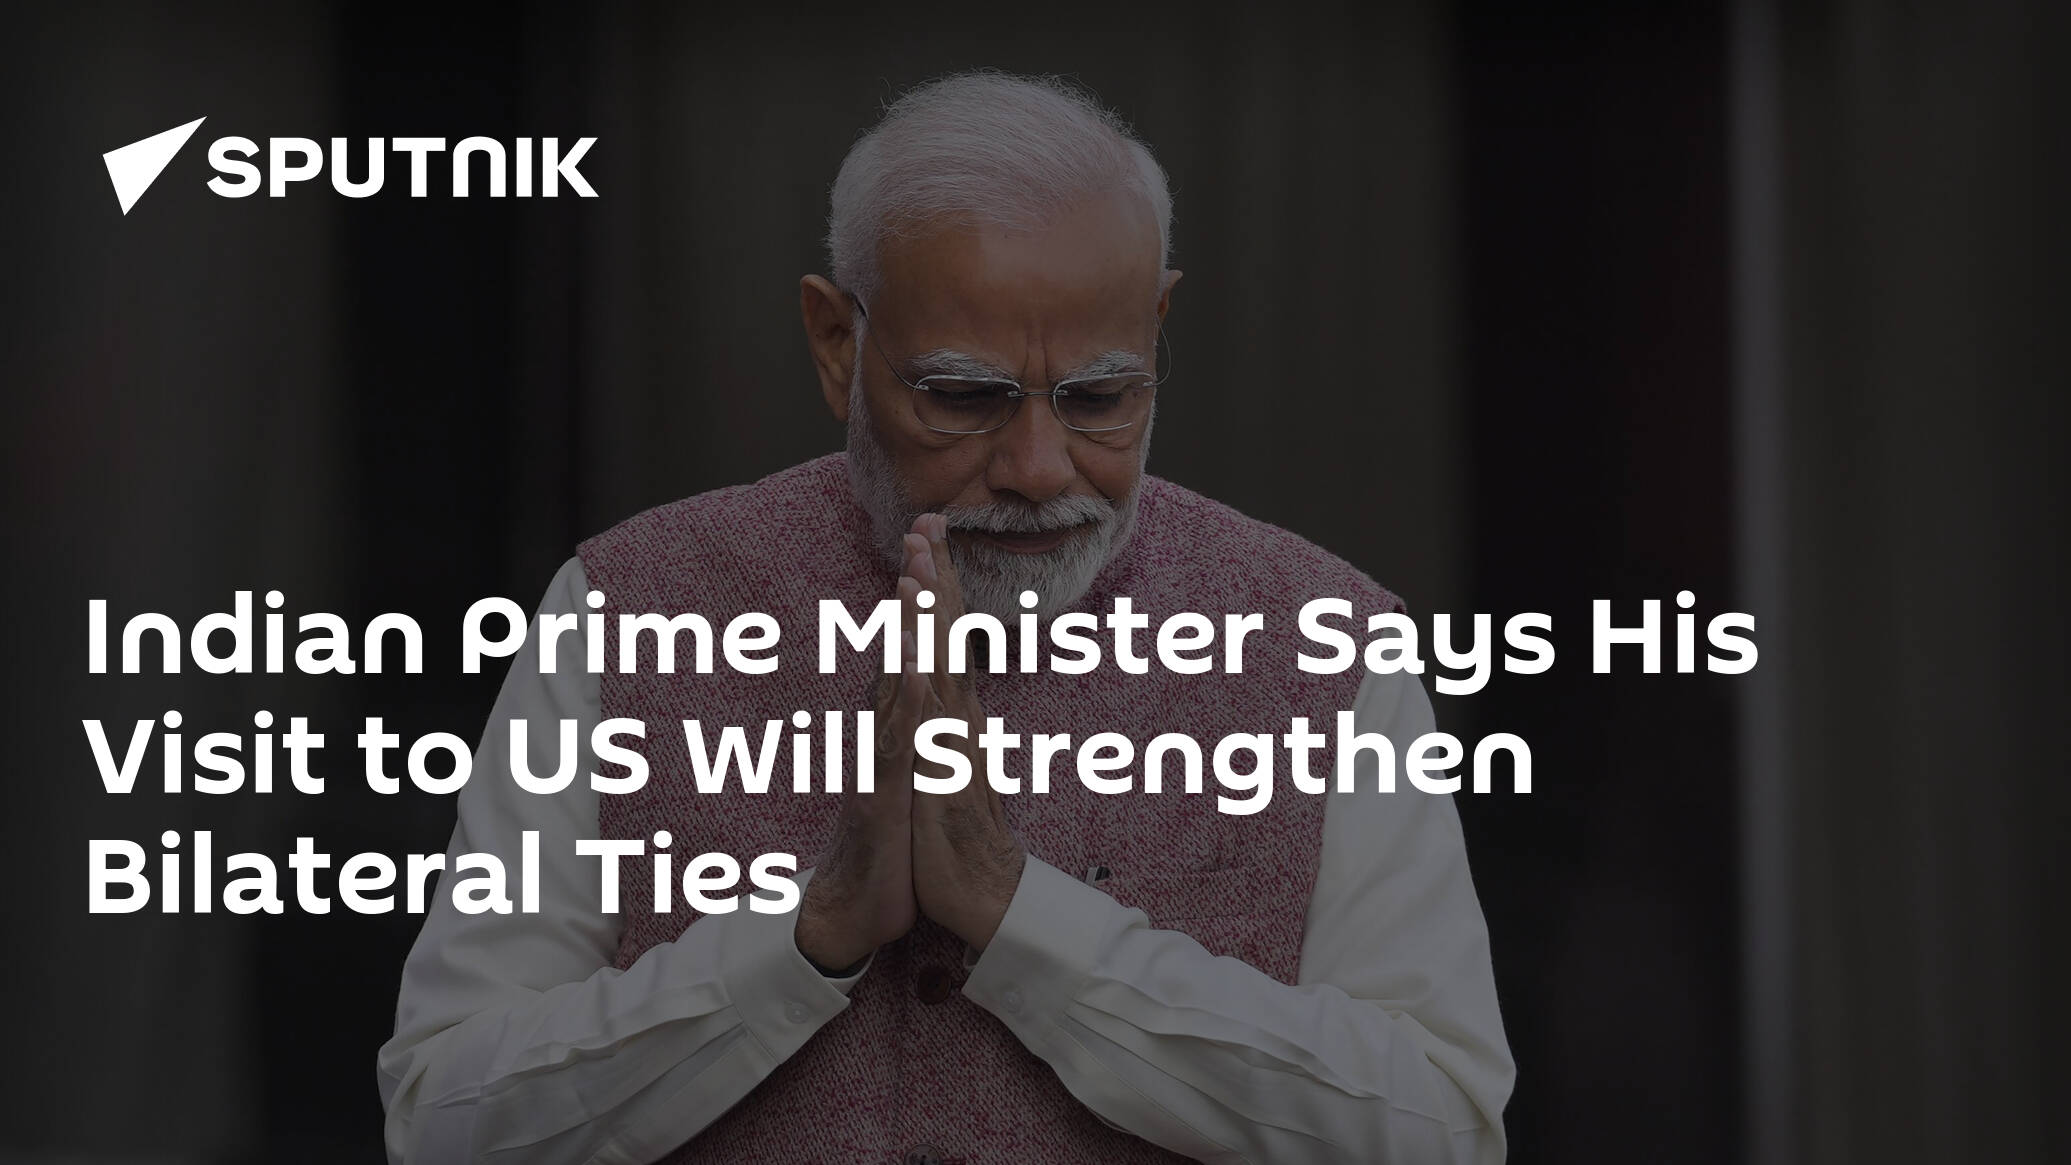 Indian Prime Minister Says His Visit to US Will Strengthen Bilateral Ties